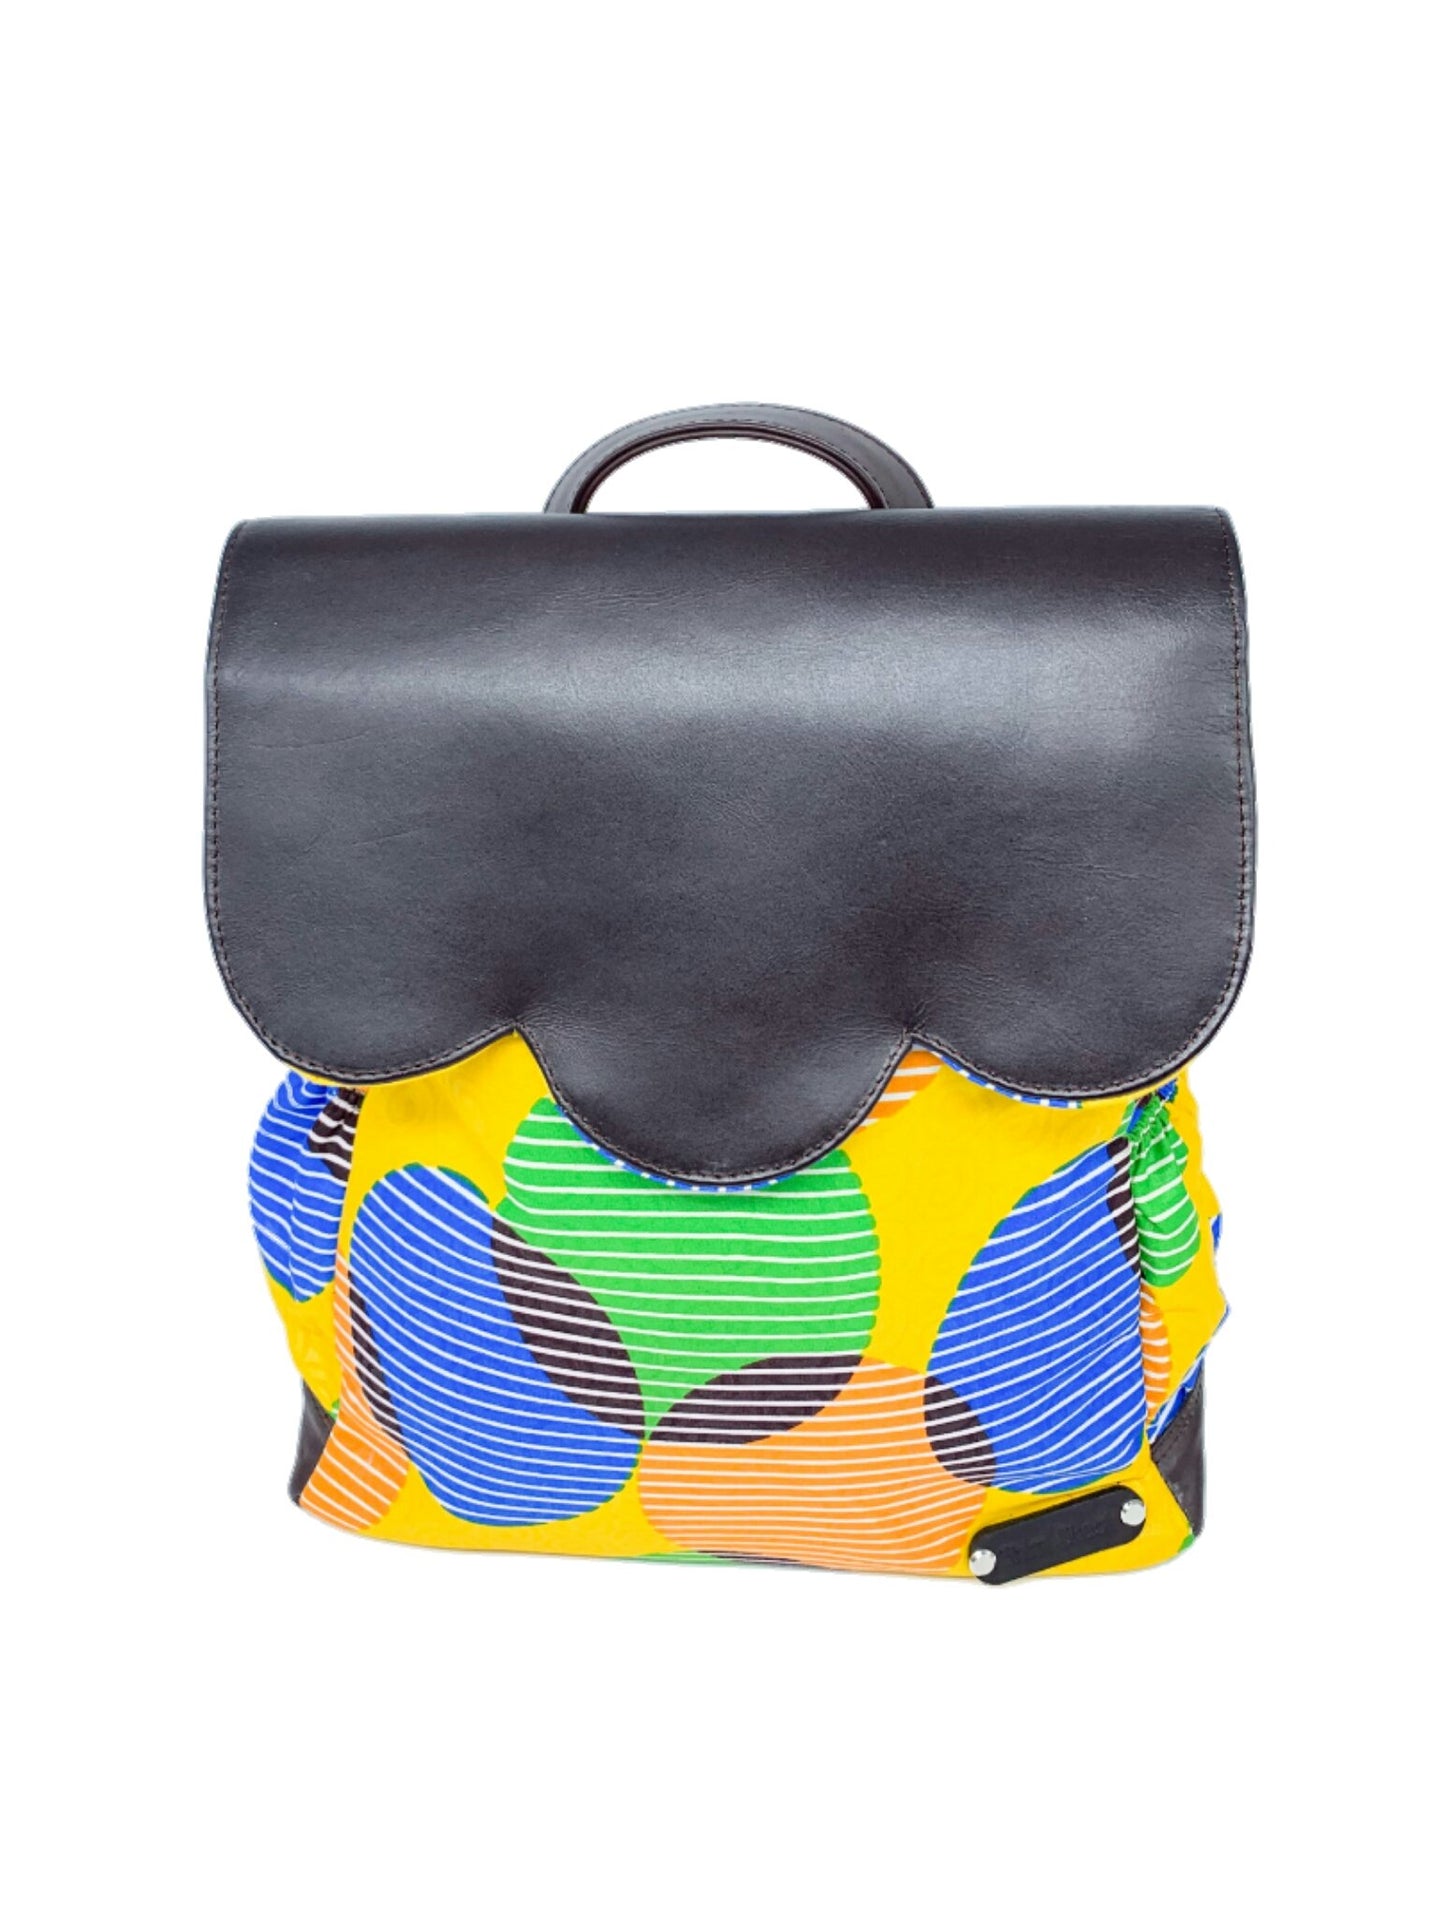 Bea Handcrafted Ankara Leather flap Backpack: Boho Style with Plenty of Room for Adventure